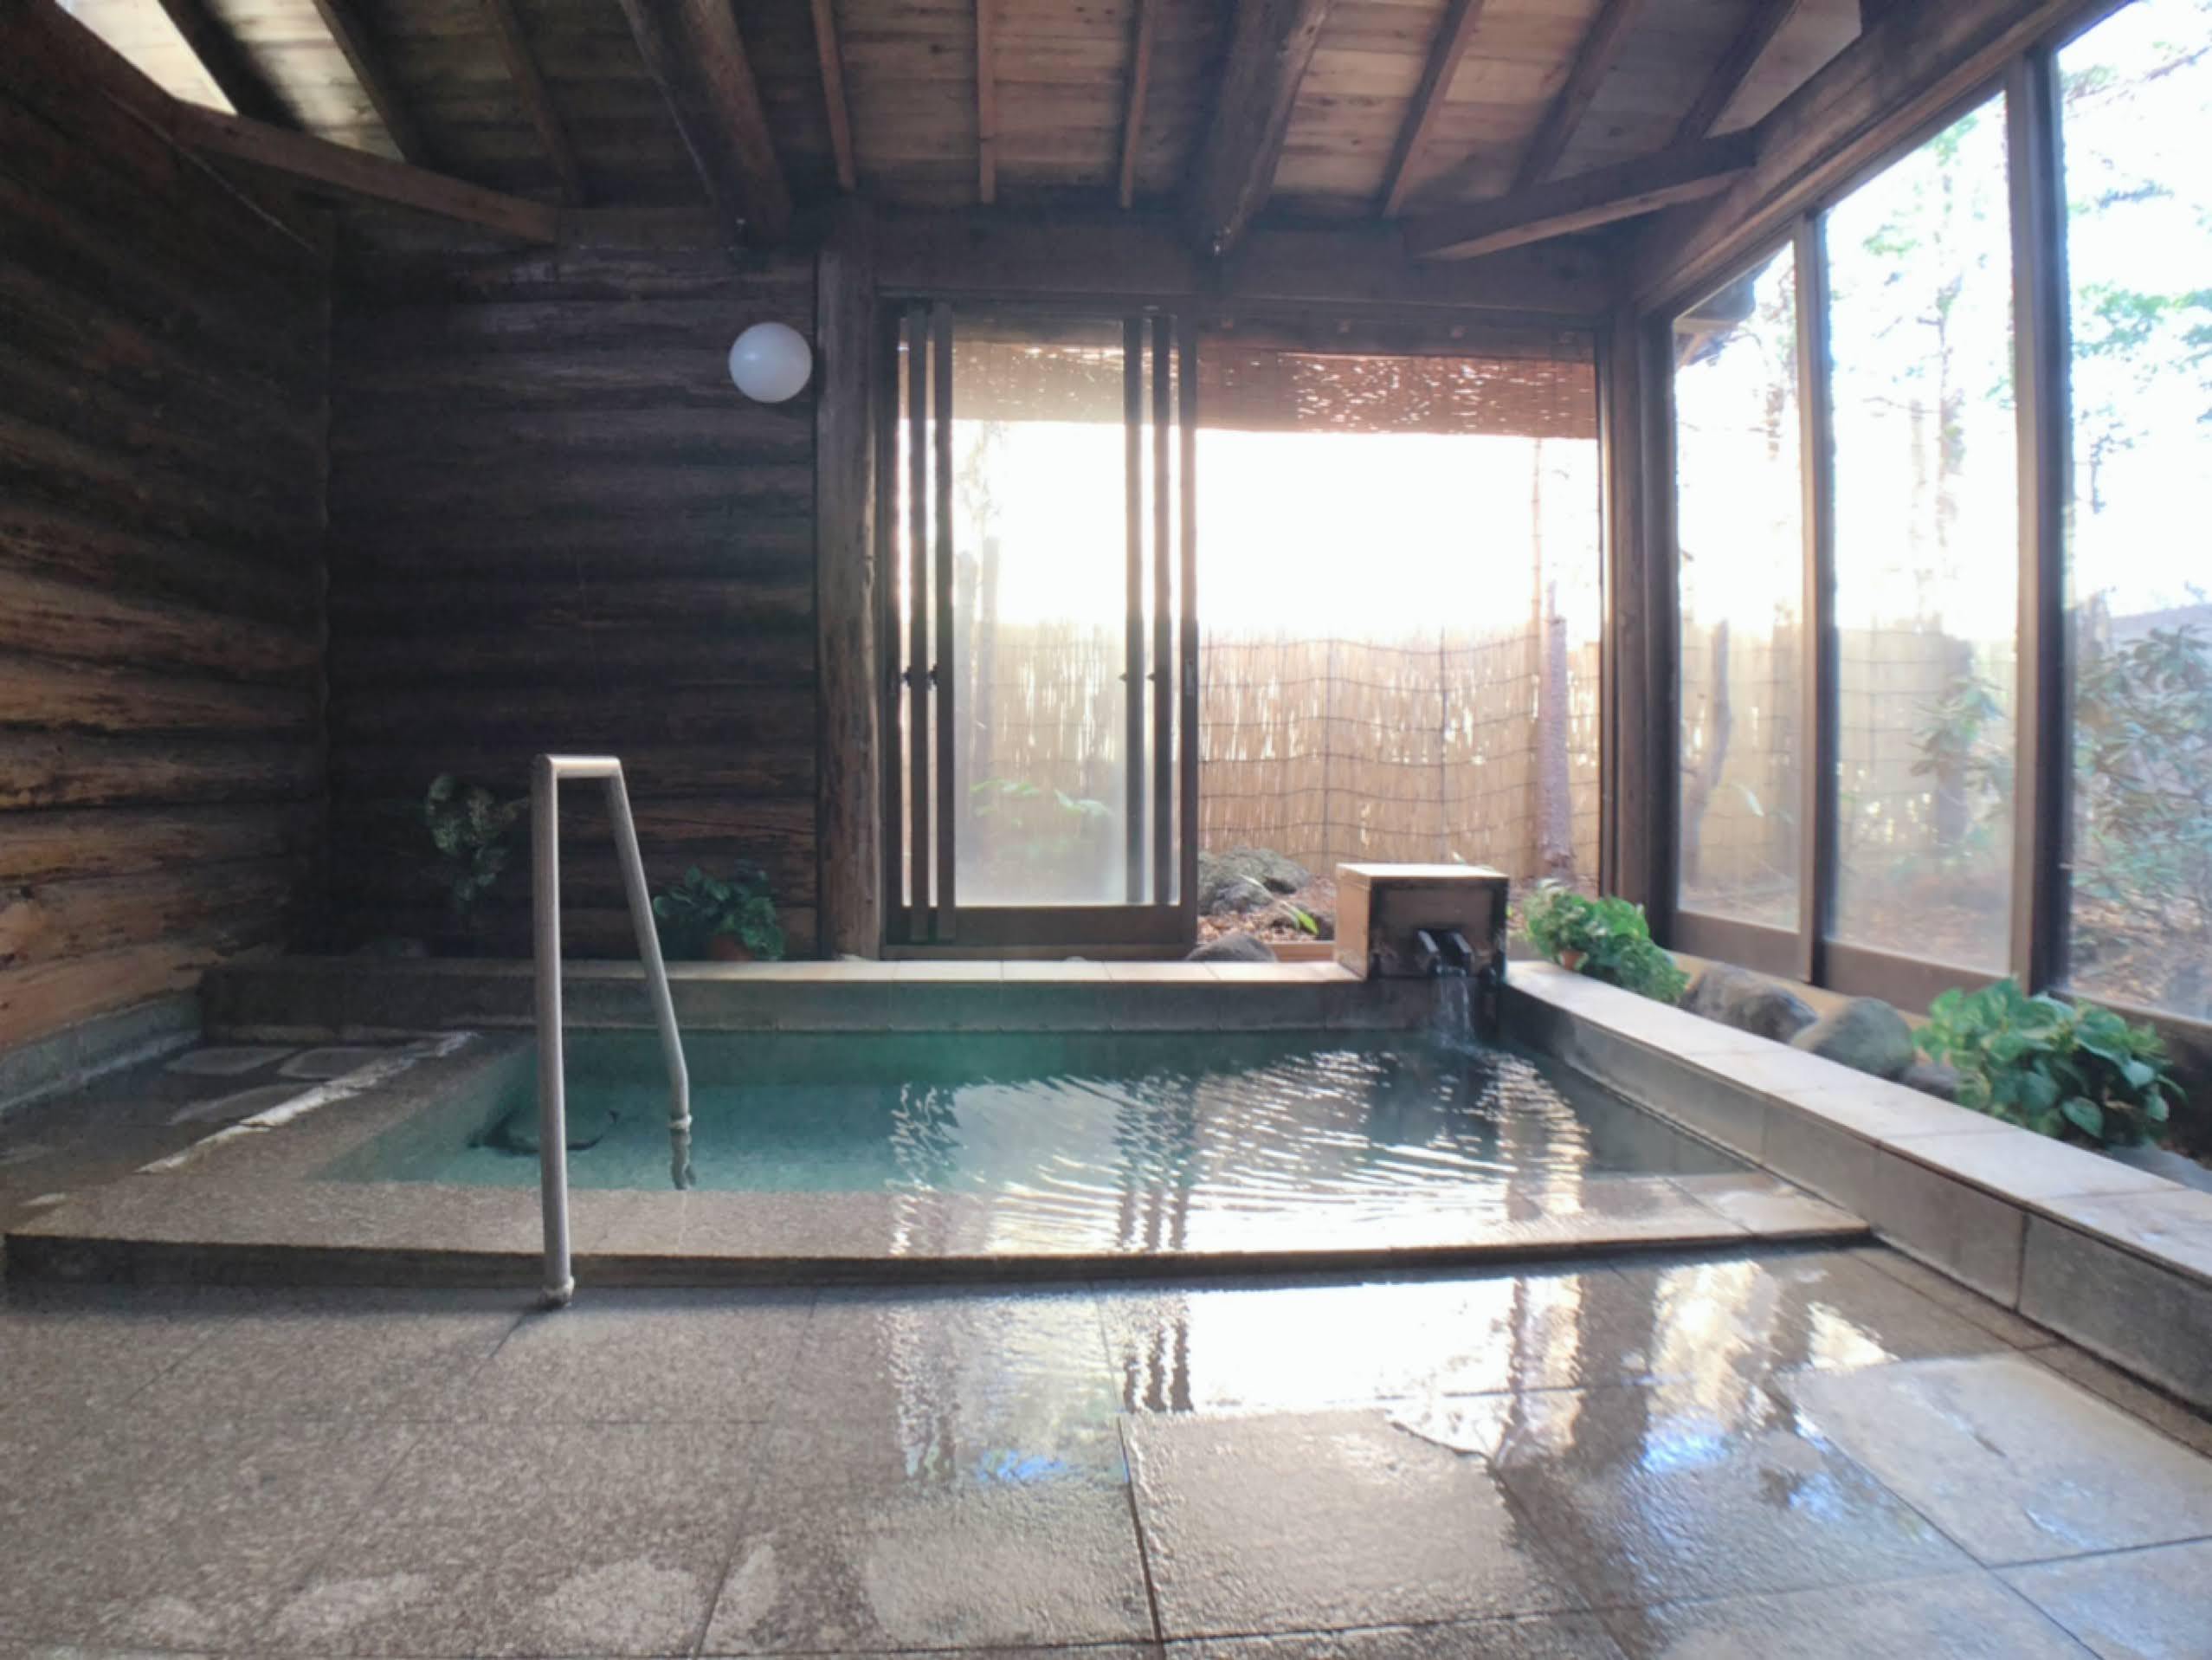 Kusatsu Onsen Pension Ranburu The 2-star Kusatsu Onsen Pension Ramburu offers comfort and convenience whether youre on business or holiday in Kusatsu. The property offers guests a range of services and amenities designed to provi